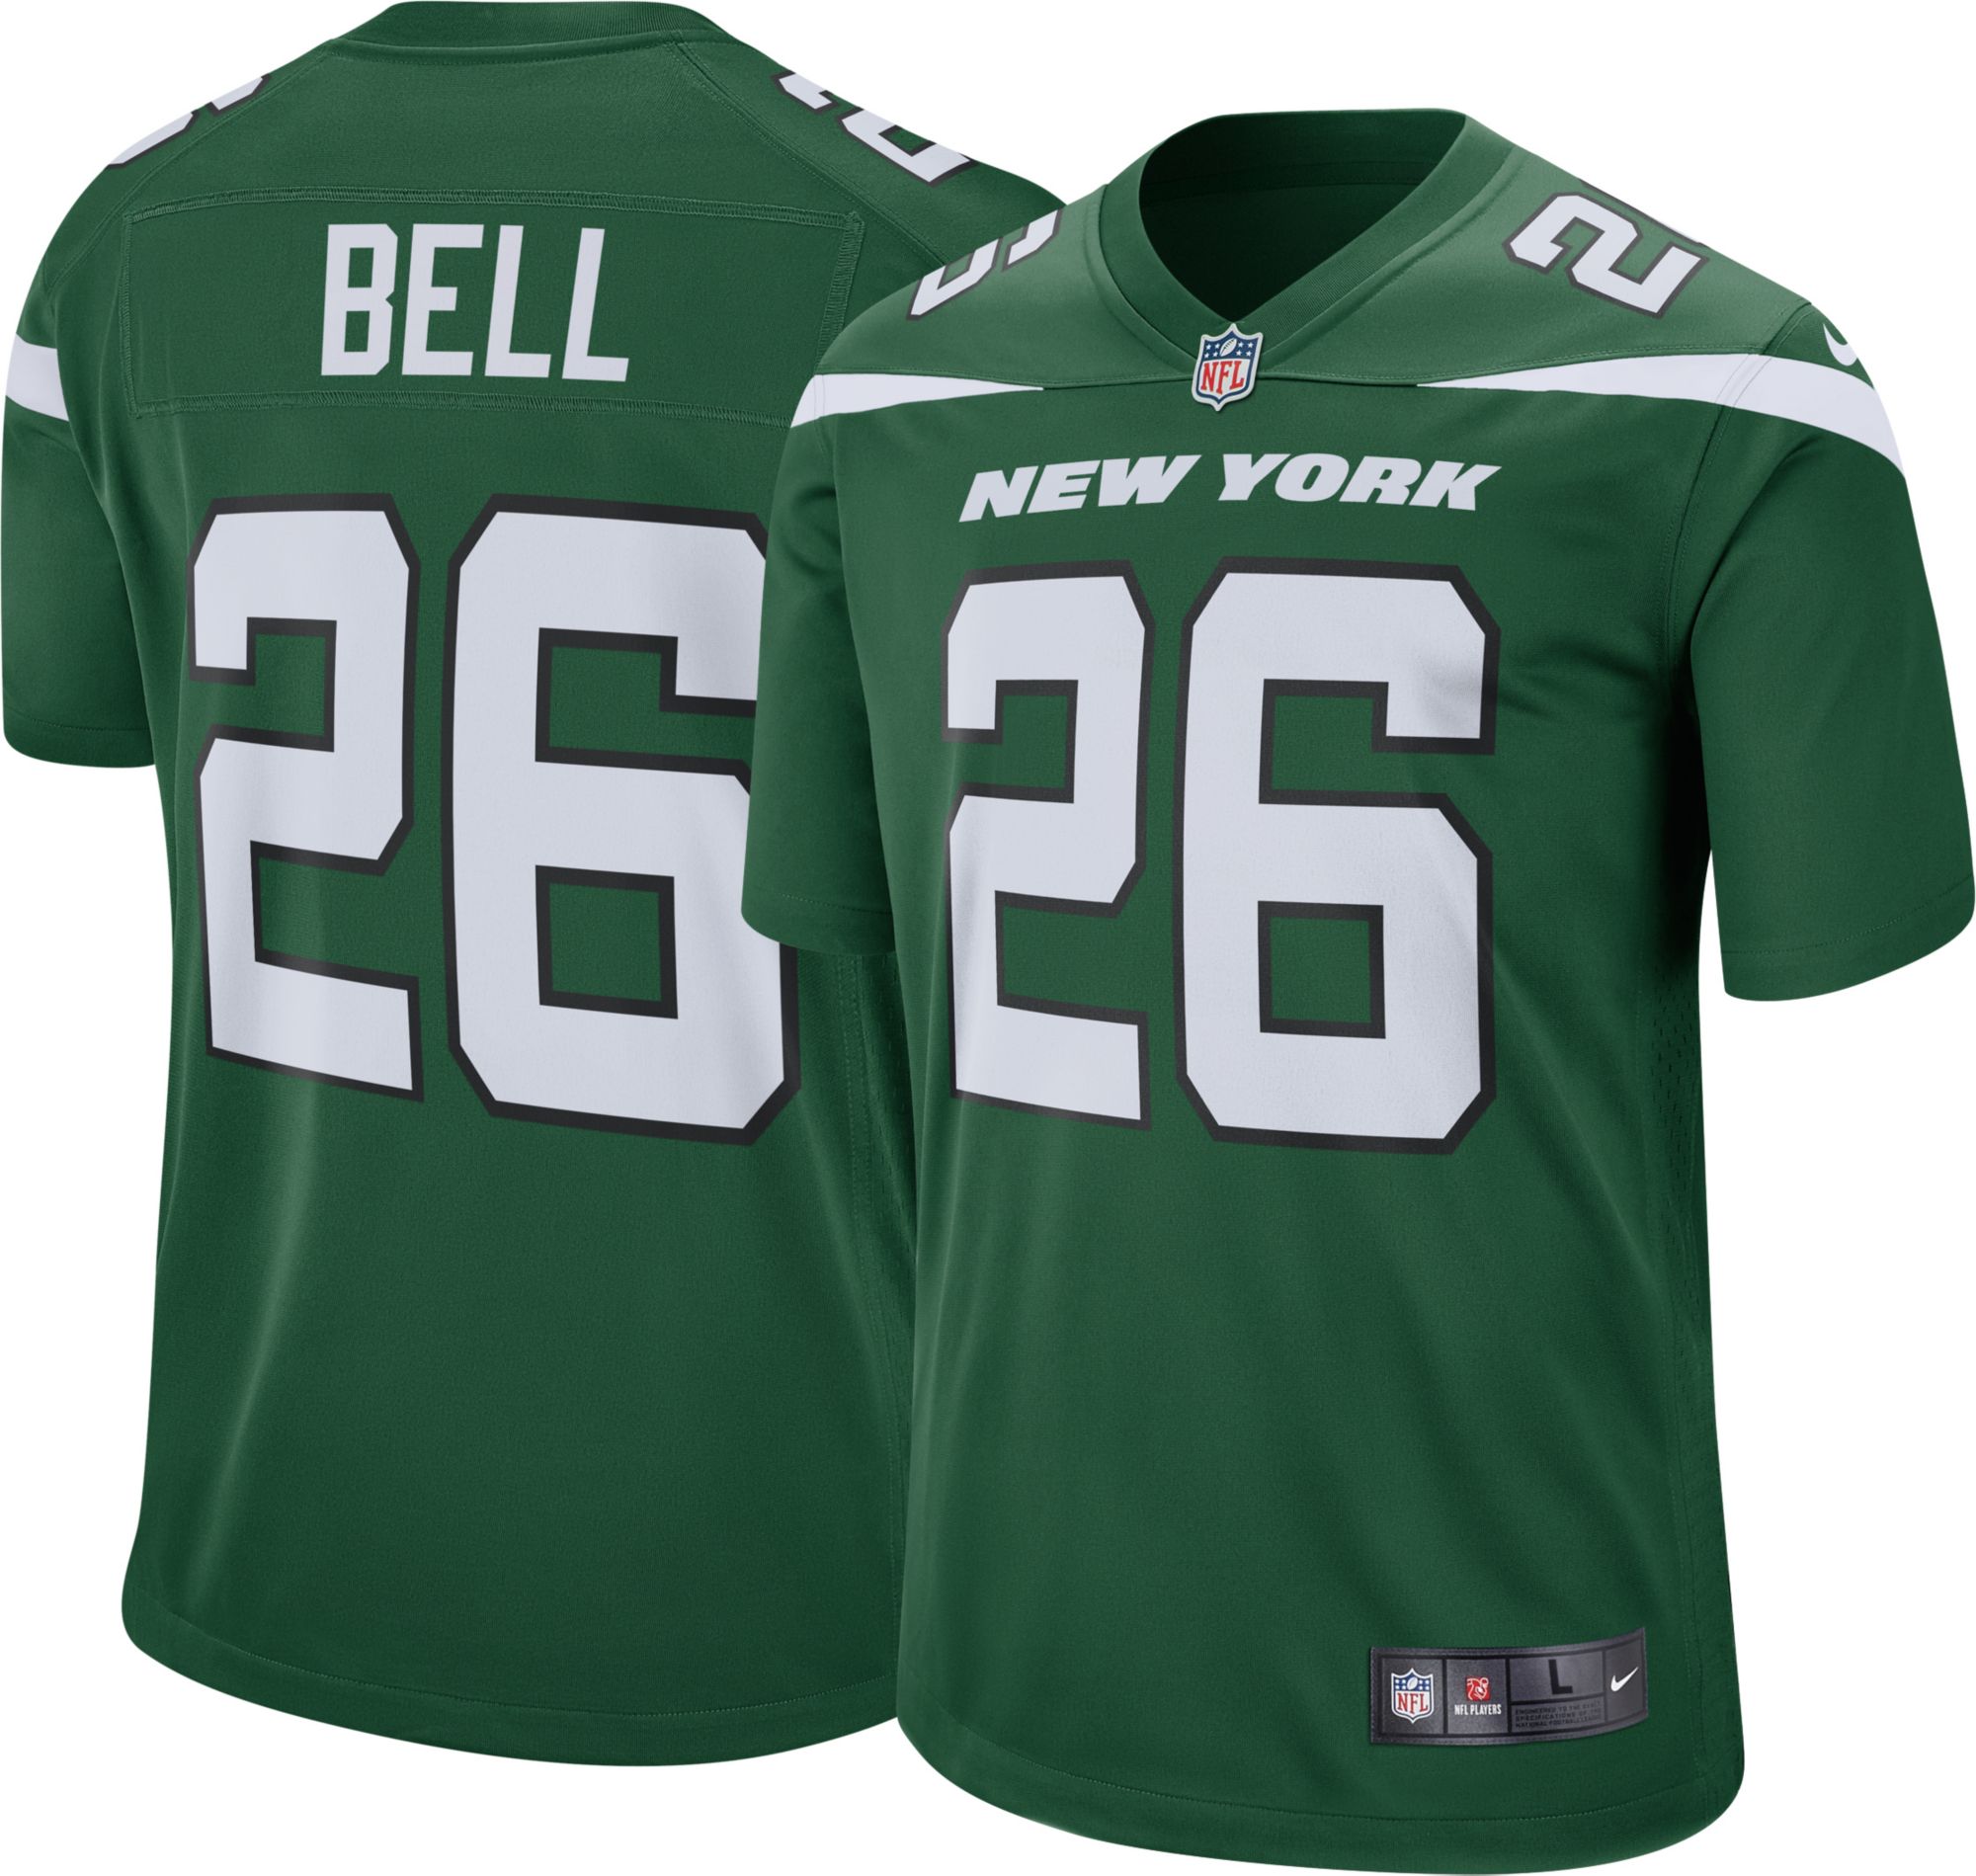 jets jersey bell